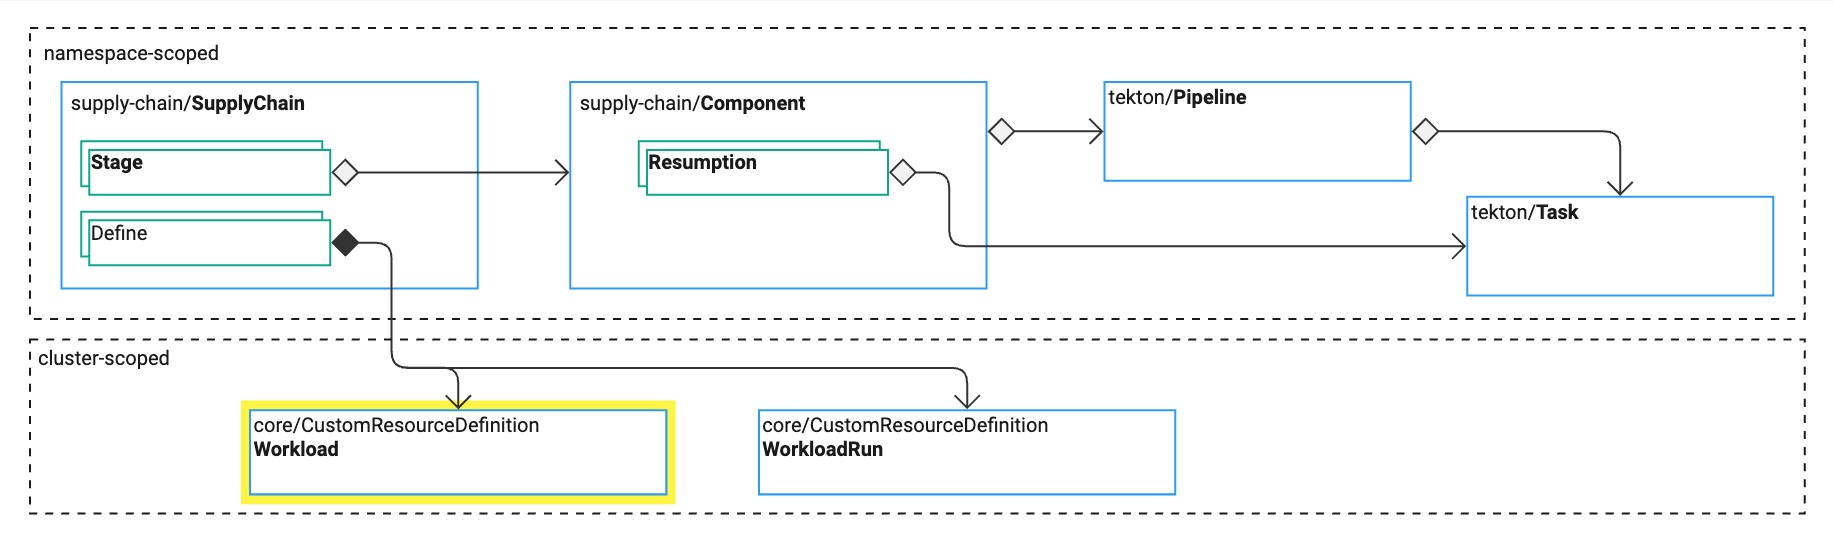 Diagram of the relationships between key Tanzu Supply Chain resources. Some resources are grouped together as namespace-scoped. Other resources are grouped together as cluster-scoped.